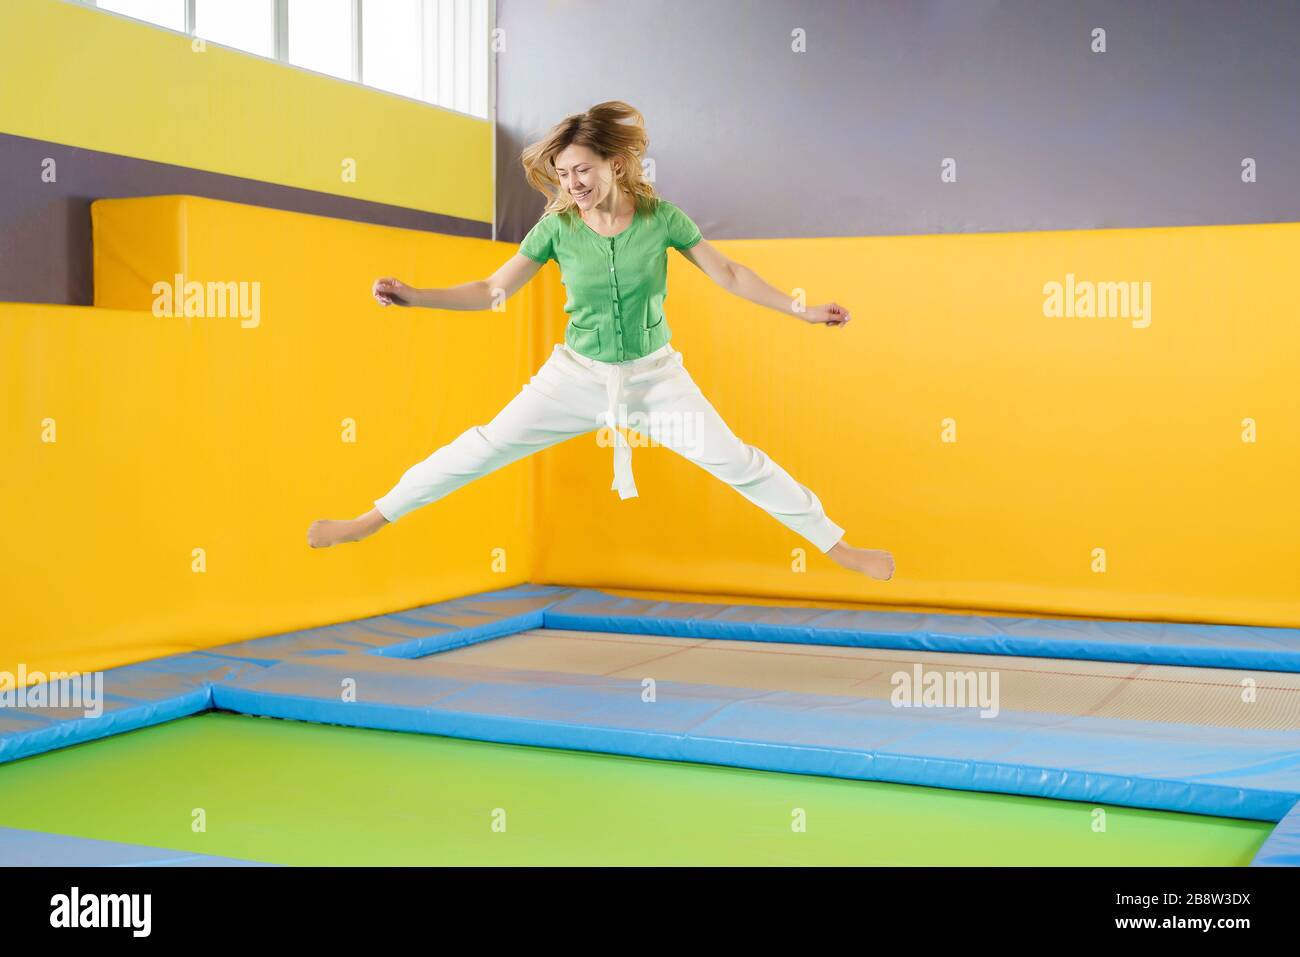 Young woman jumping and bouncing on a trampoline in sport center Stock Photo